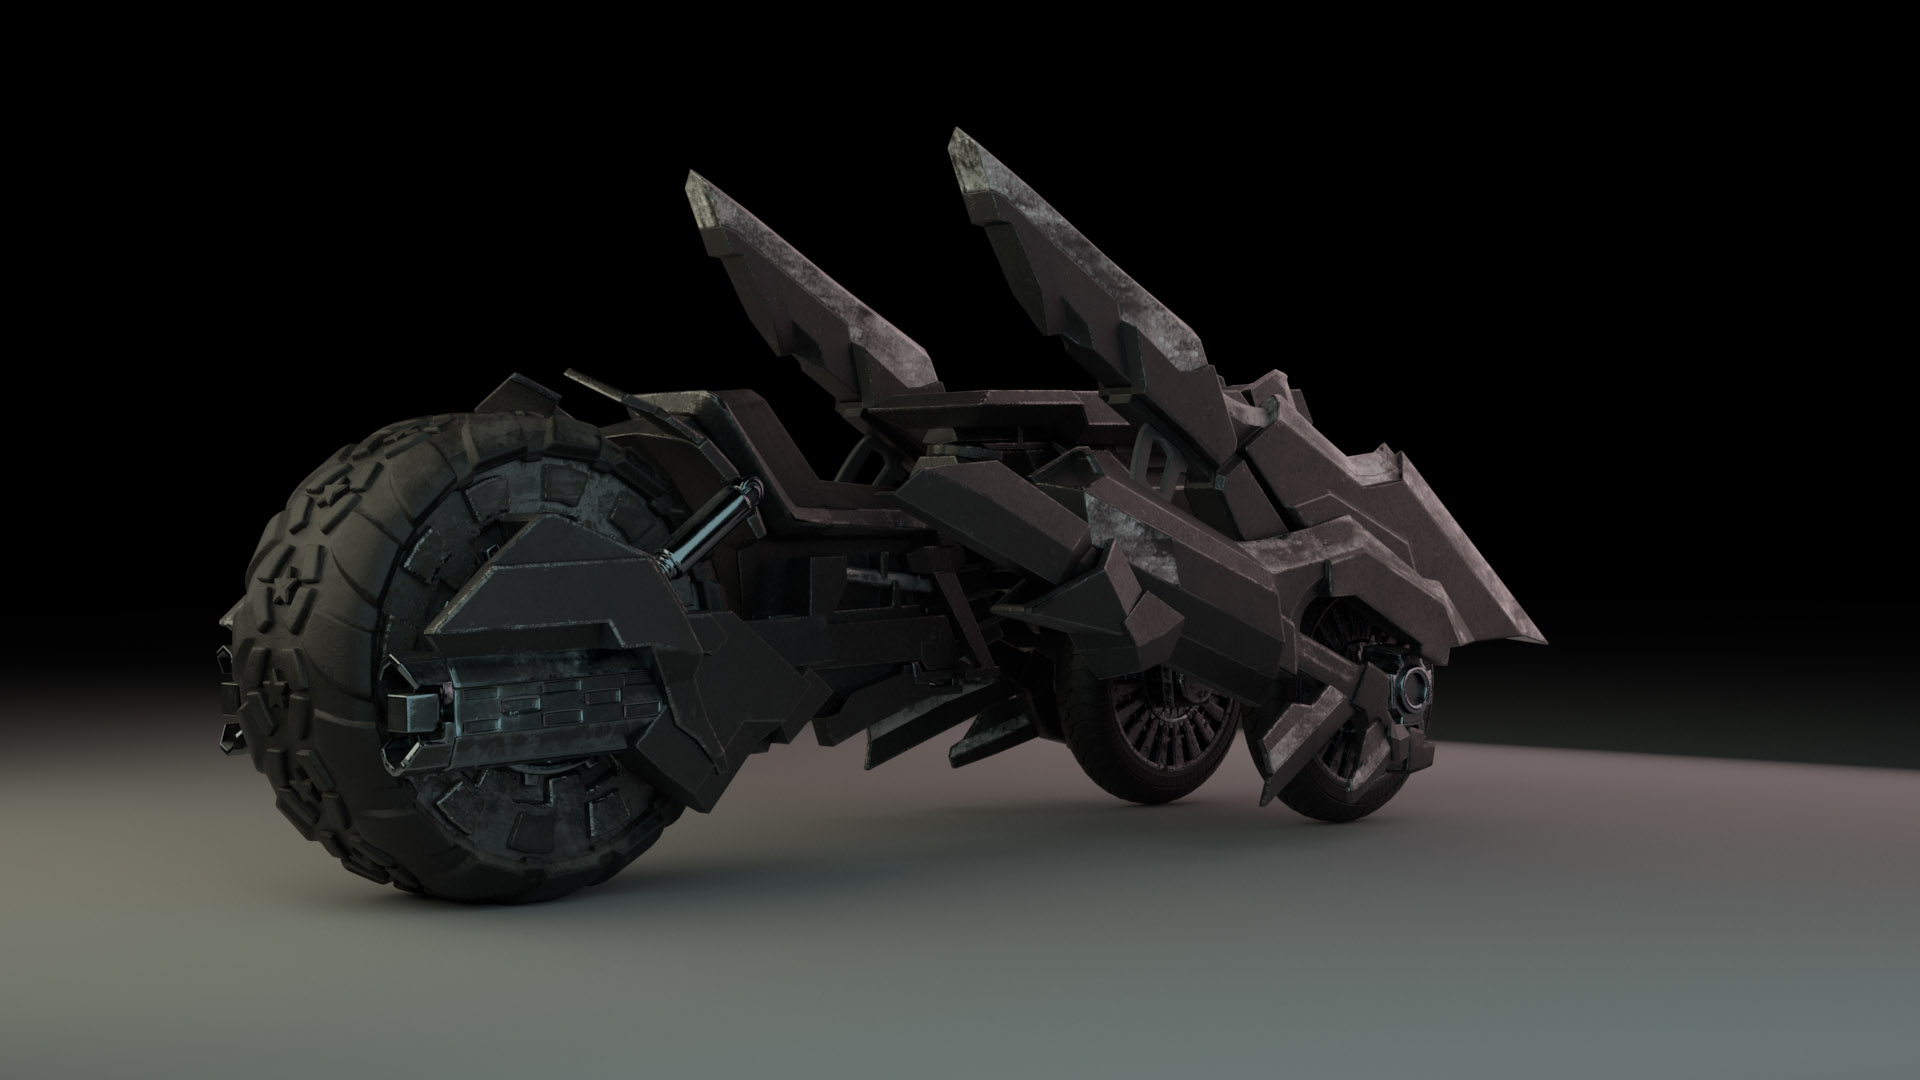 The motorcycle from “Black Rock Shooter: The Game” side view